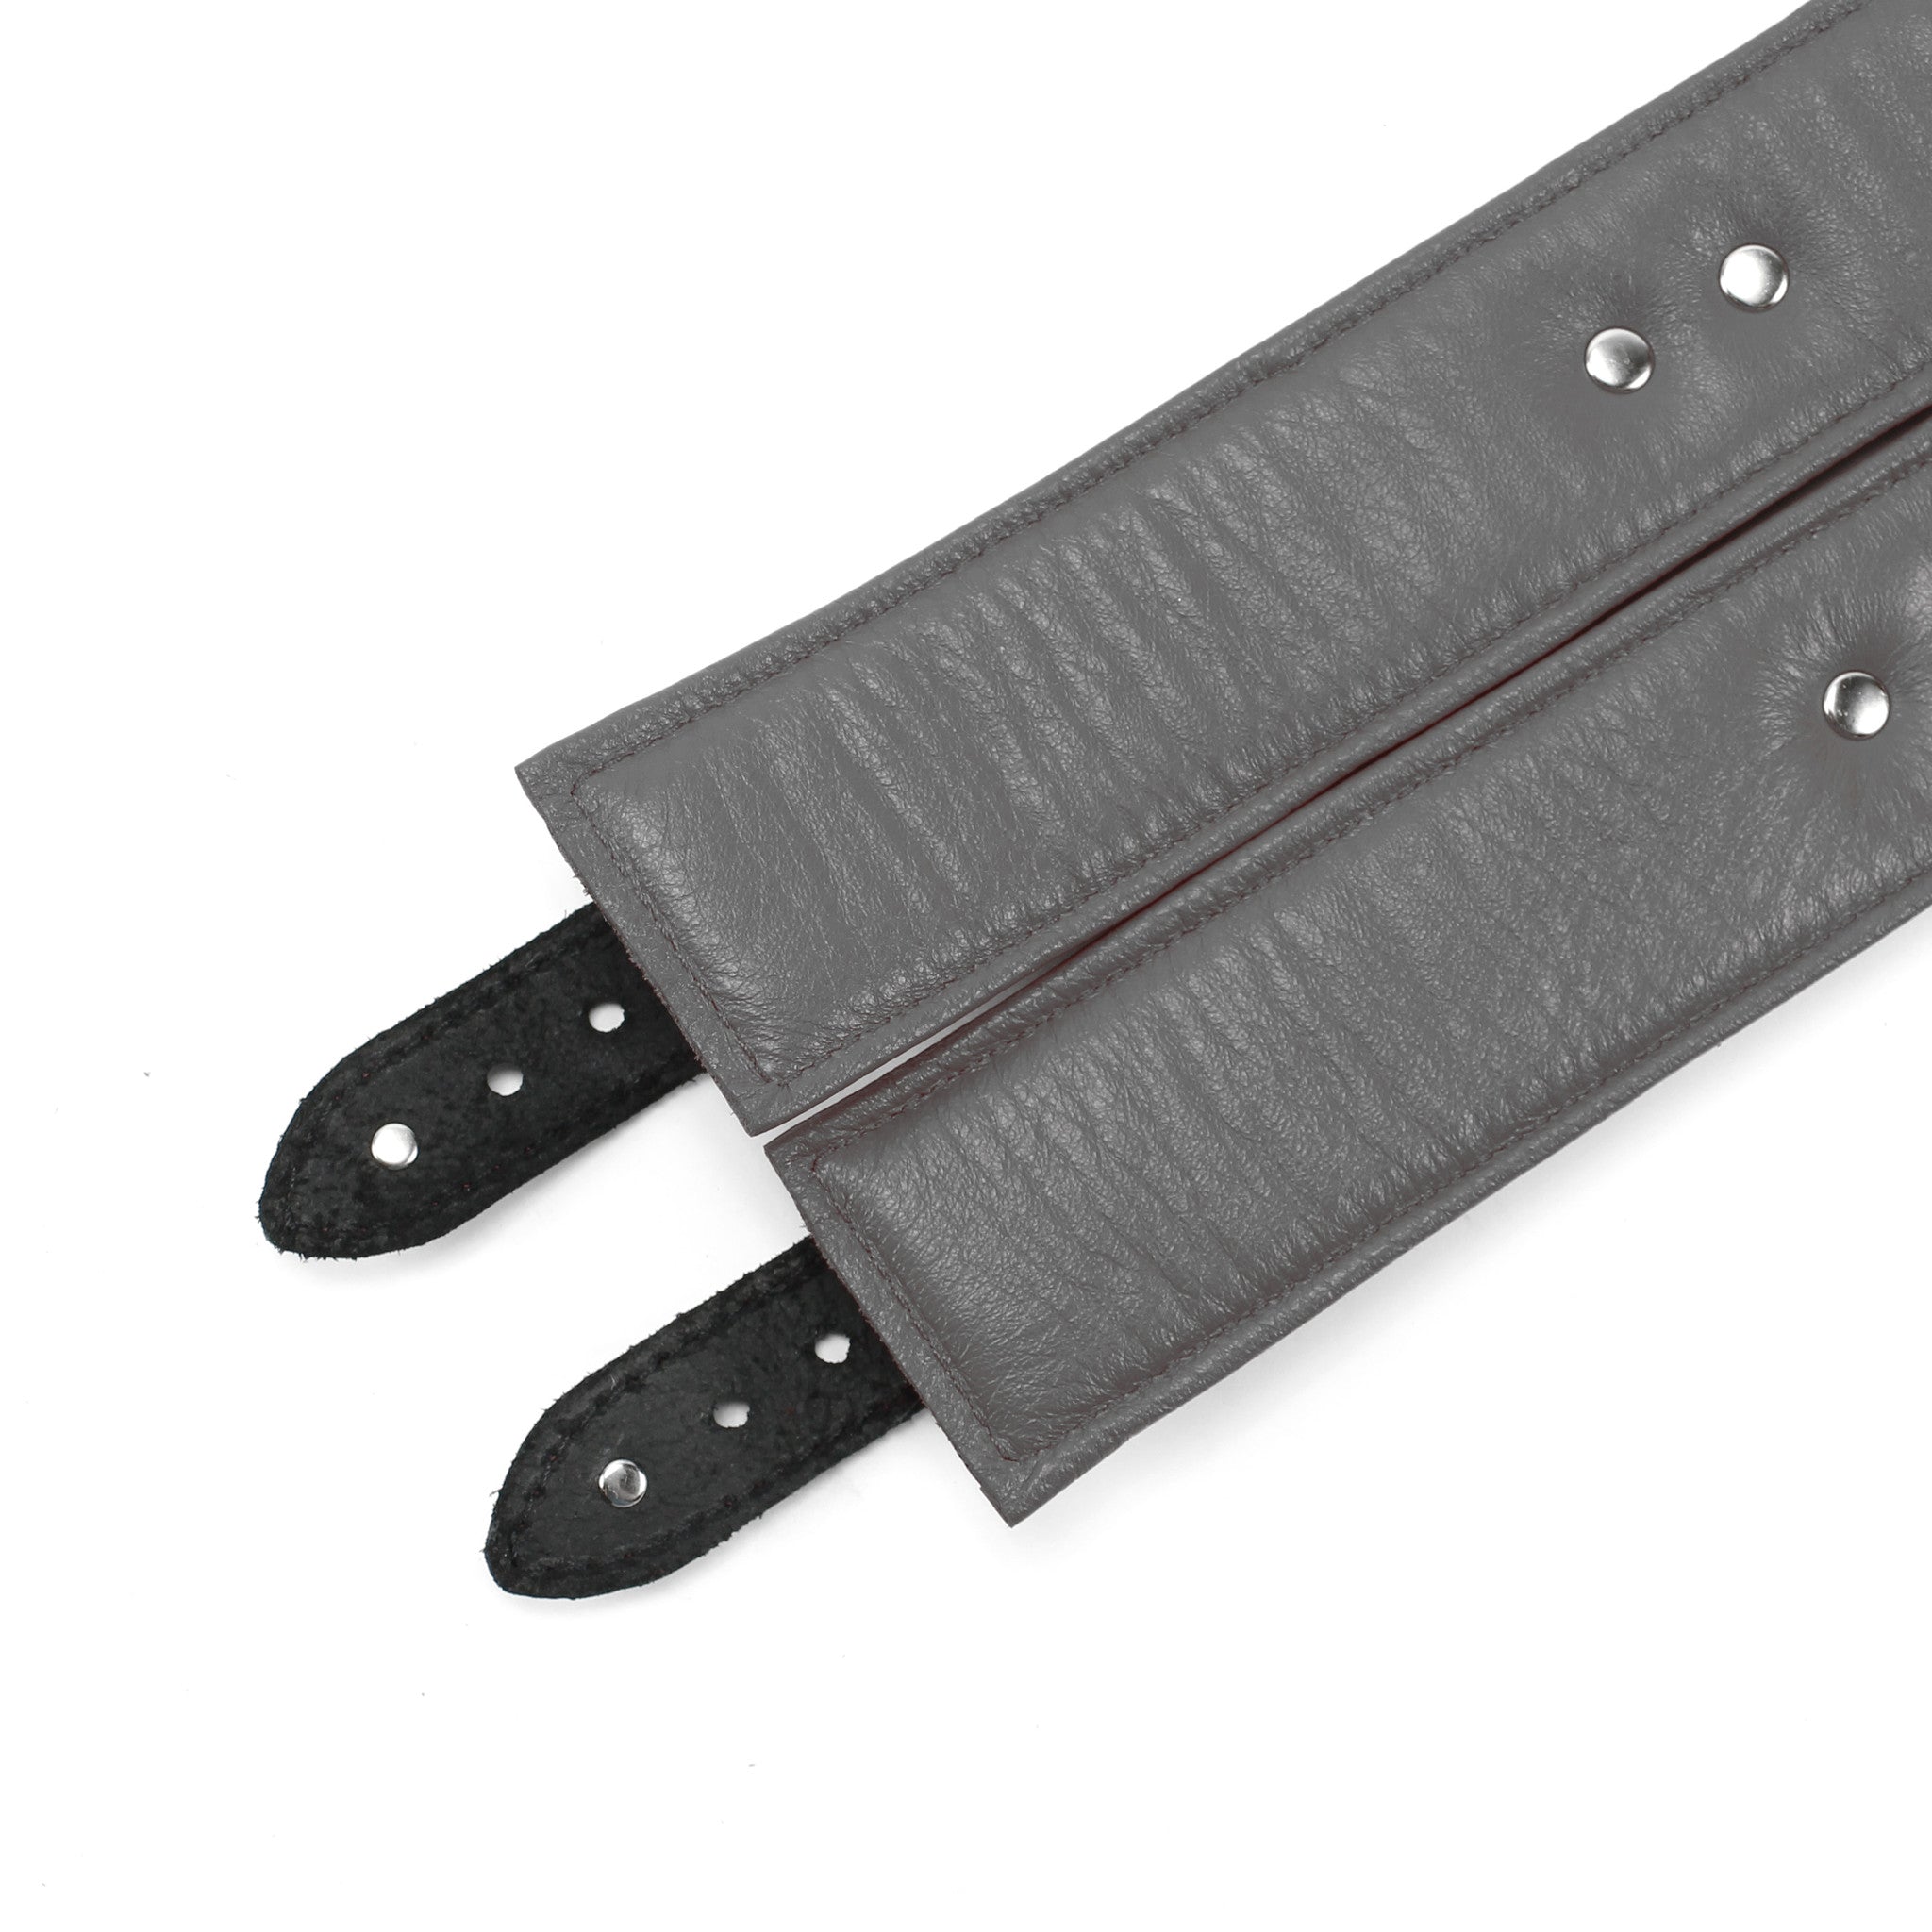 Mandrake Padded Leather BDSM Submissive Cuffs 2-Inch